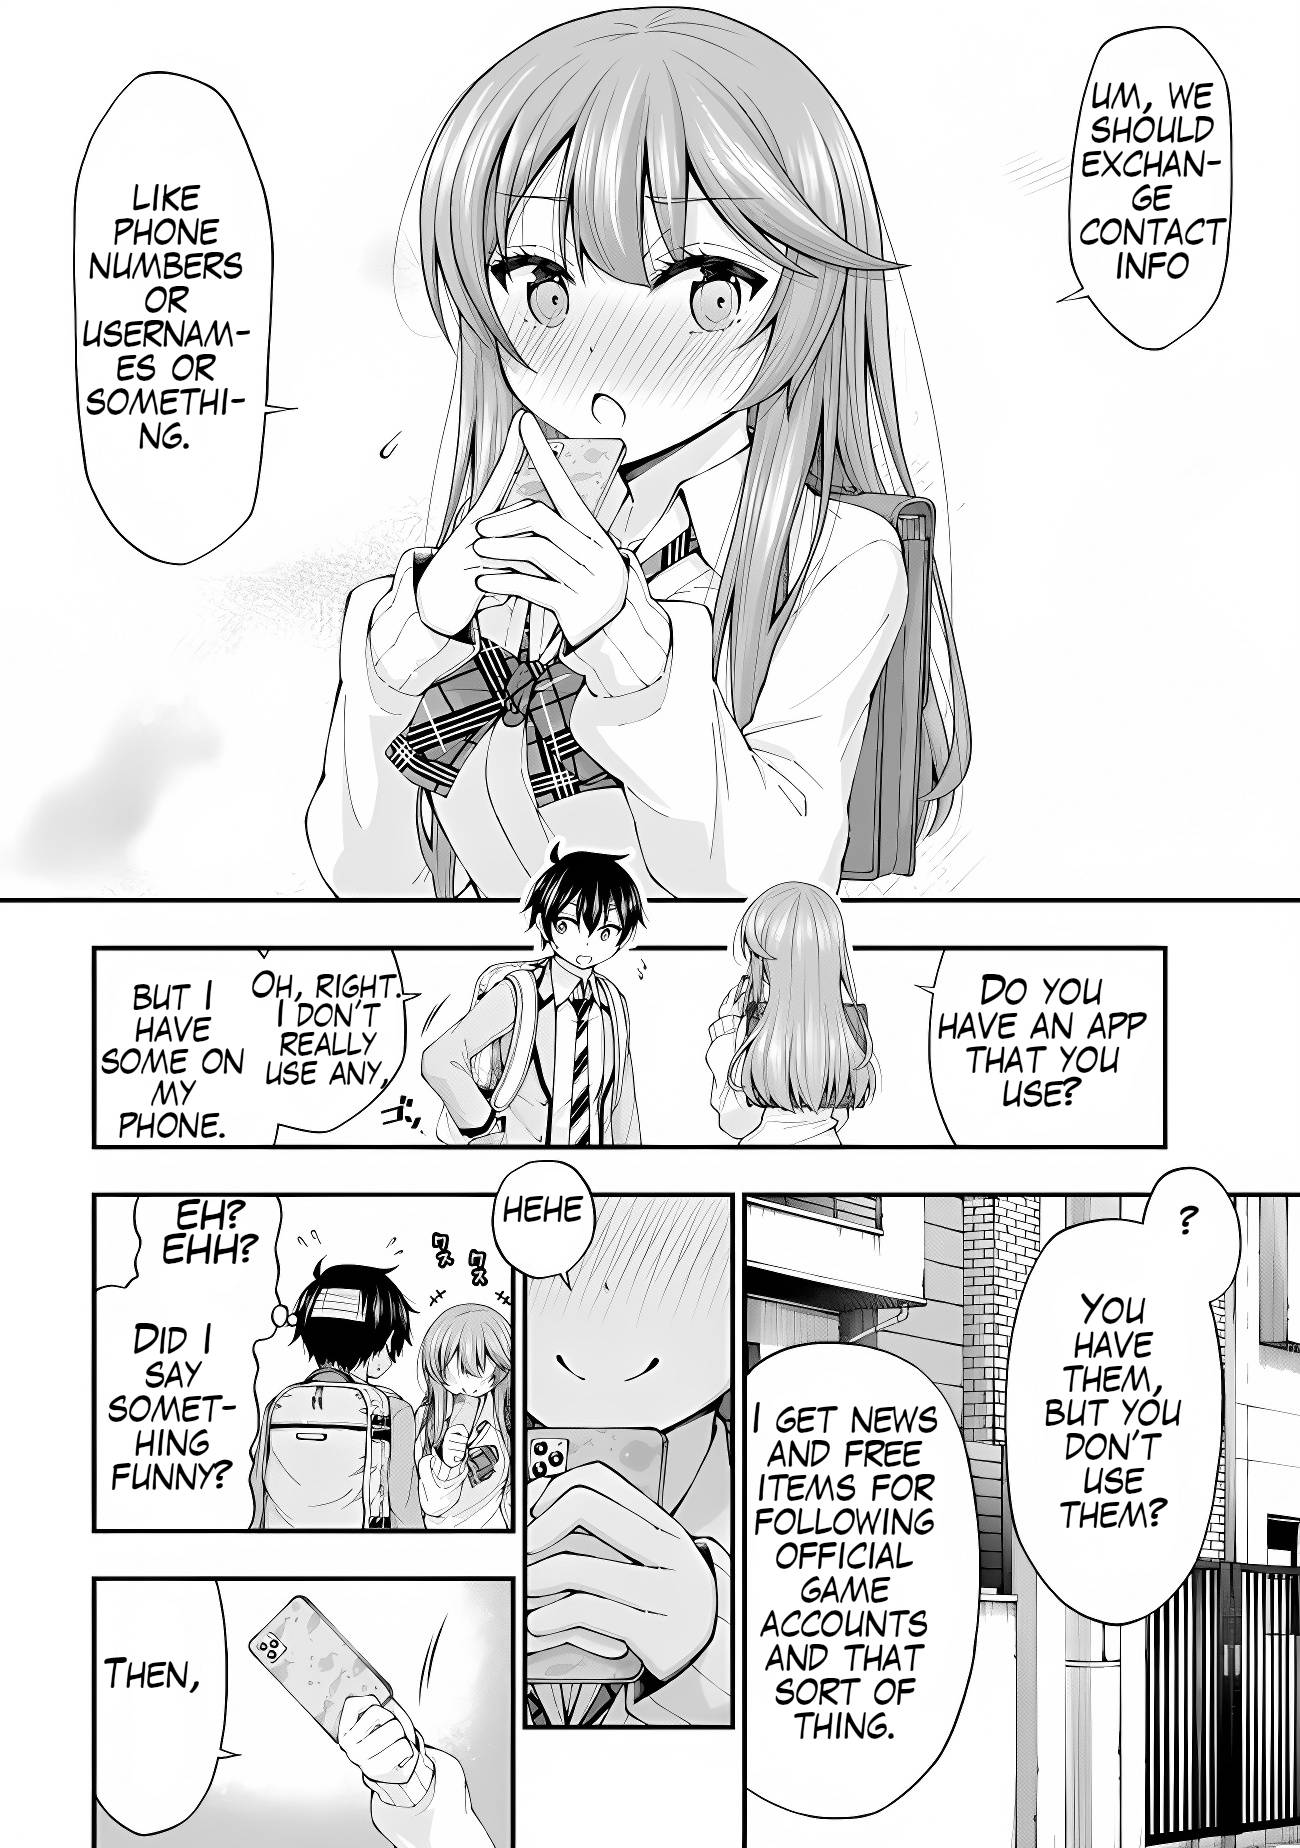 The Gal Who Was Meant to Confess to Me as a Game Punishment - chapter 2 - #6